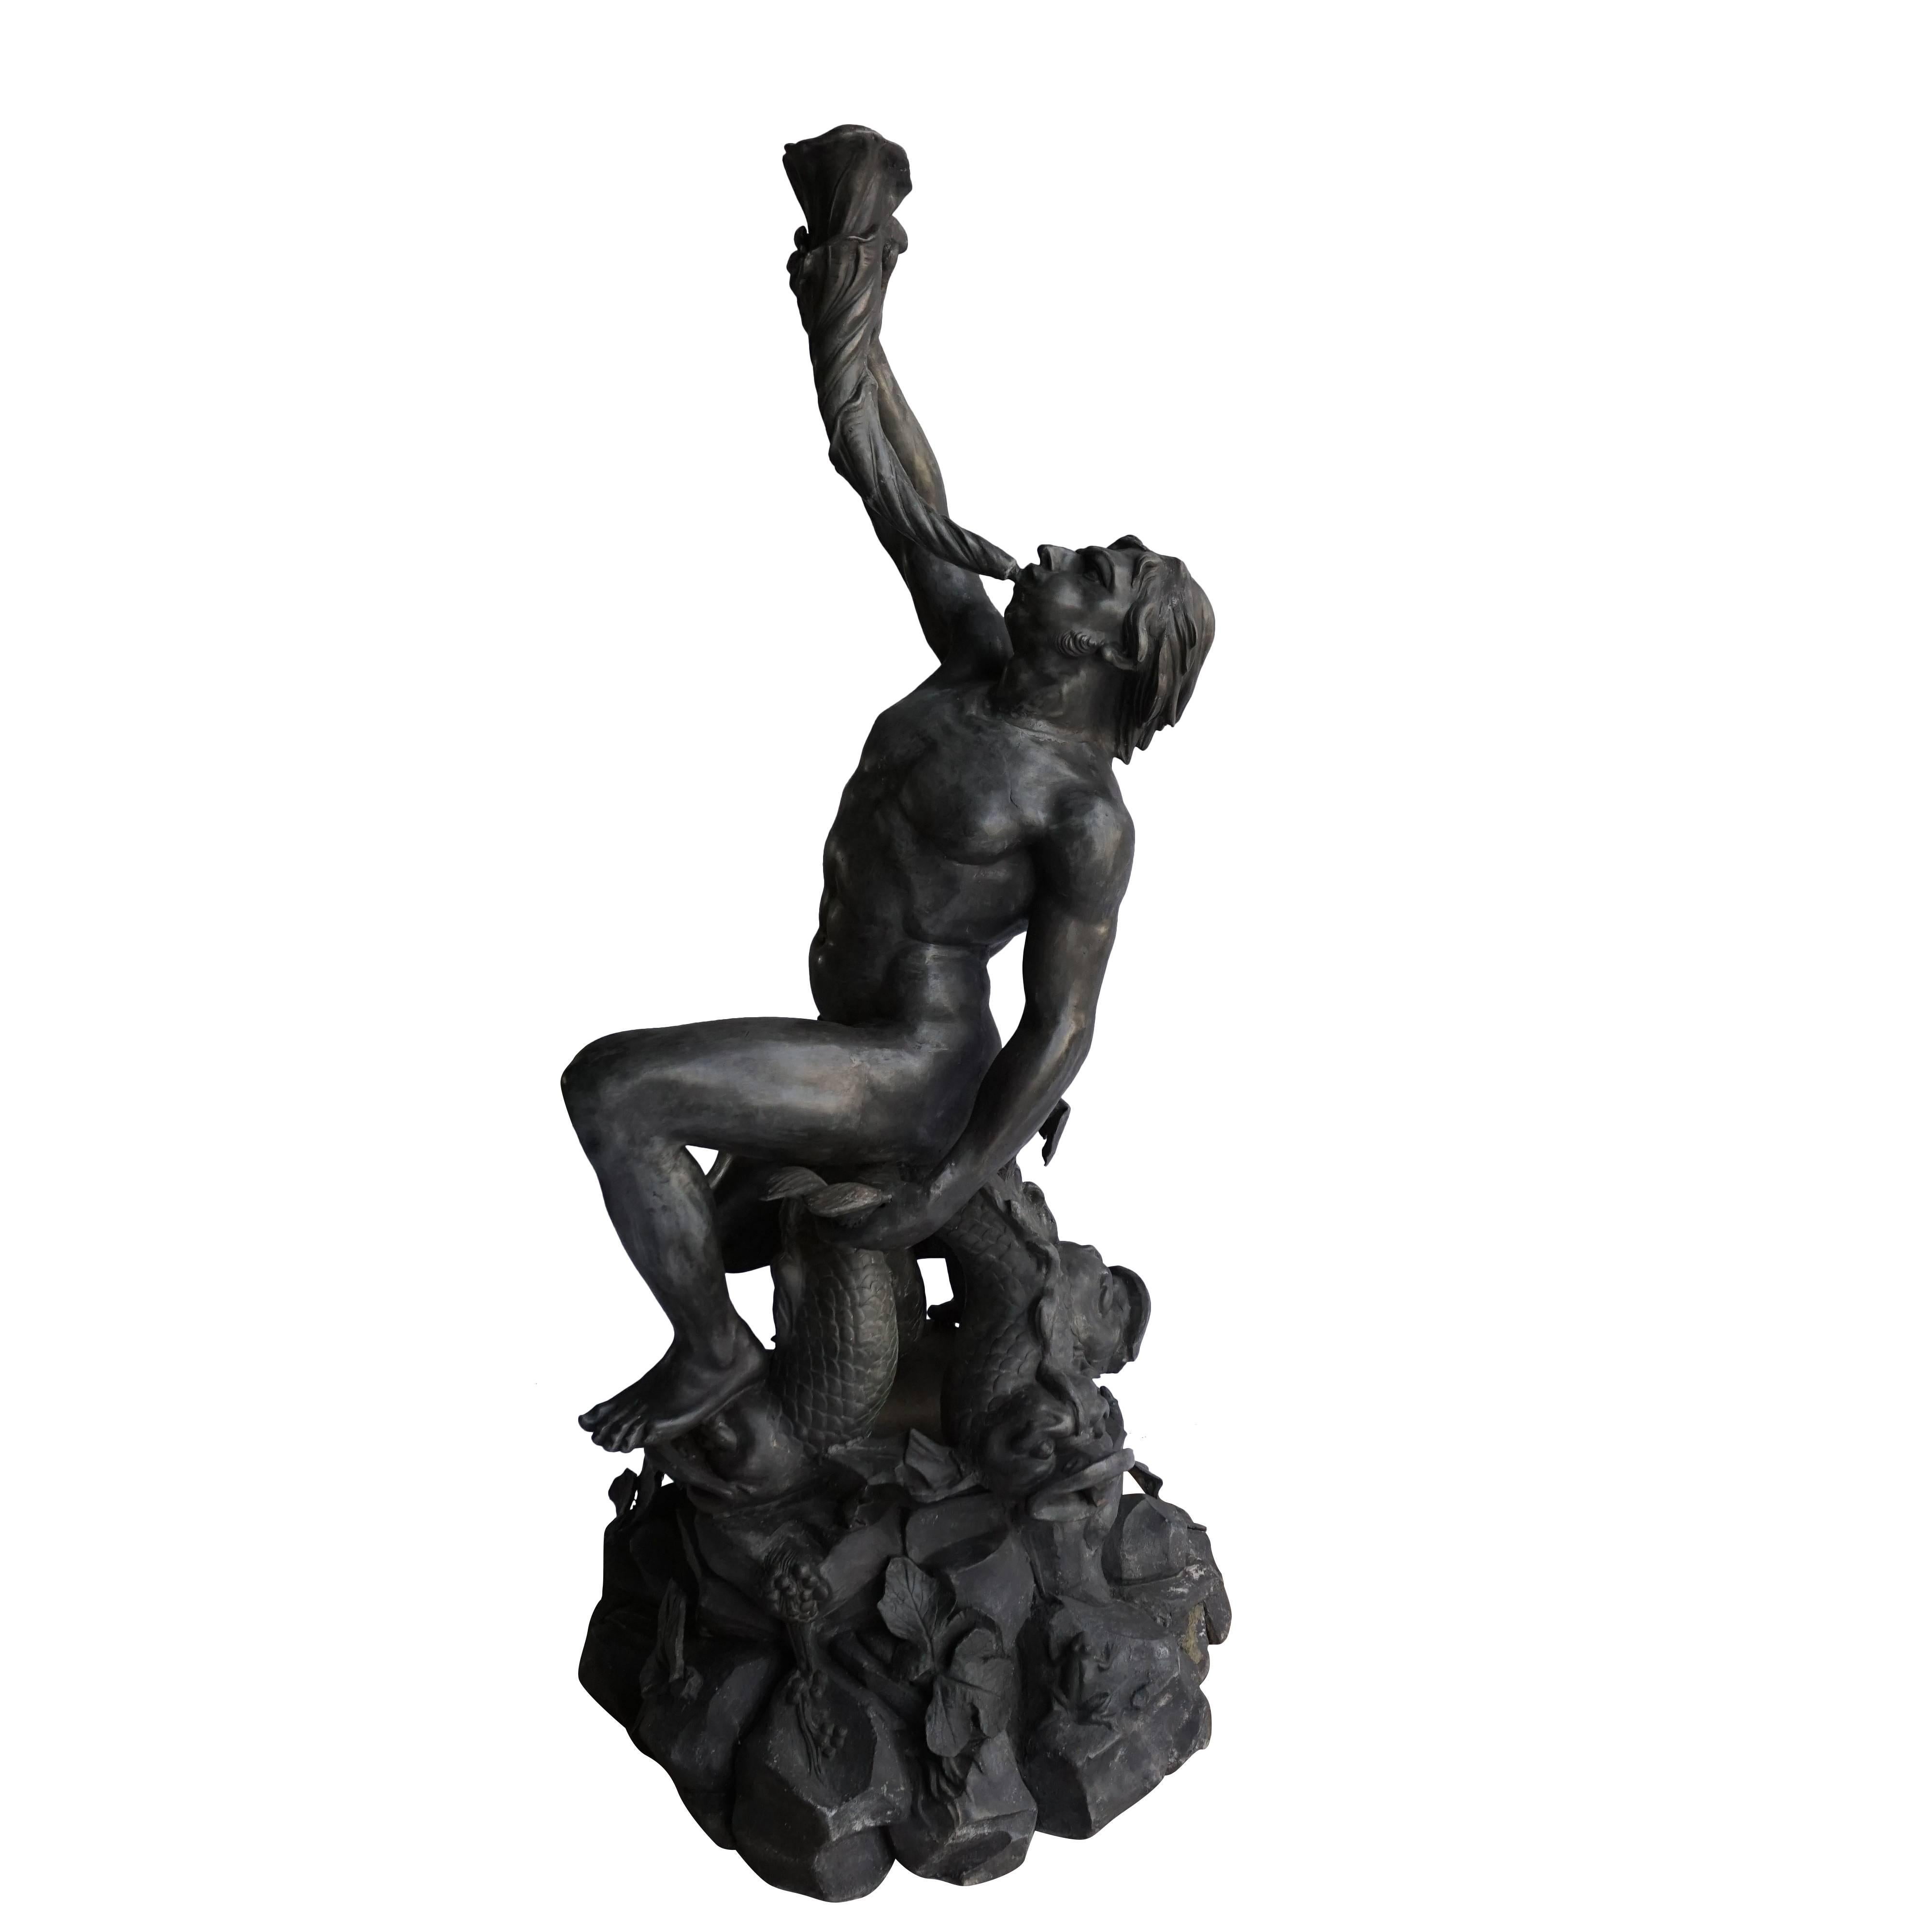 Metal triton sculpture holding a long decorative shell as a water feature and supported by three Dauphins grotesques, circa 1840-1850. The Grotto style base is decorated with small creatures for example with frogs, leaves and grapes. Very detailed